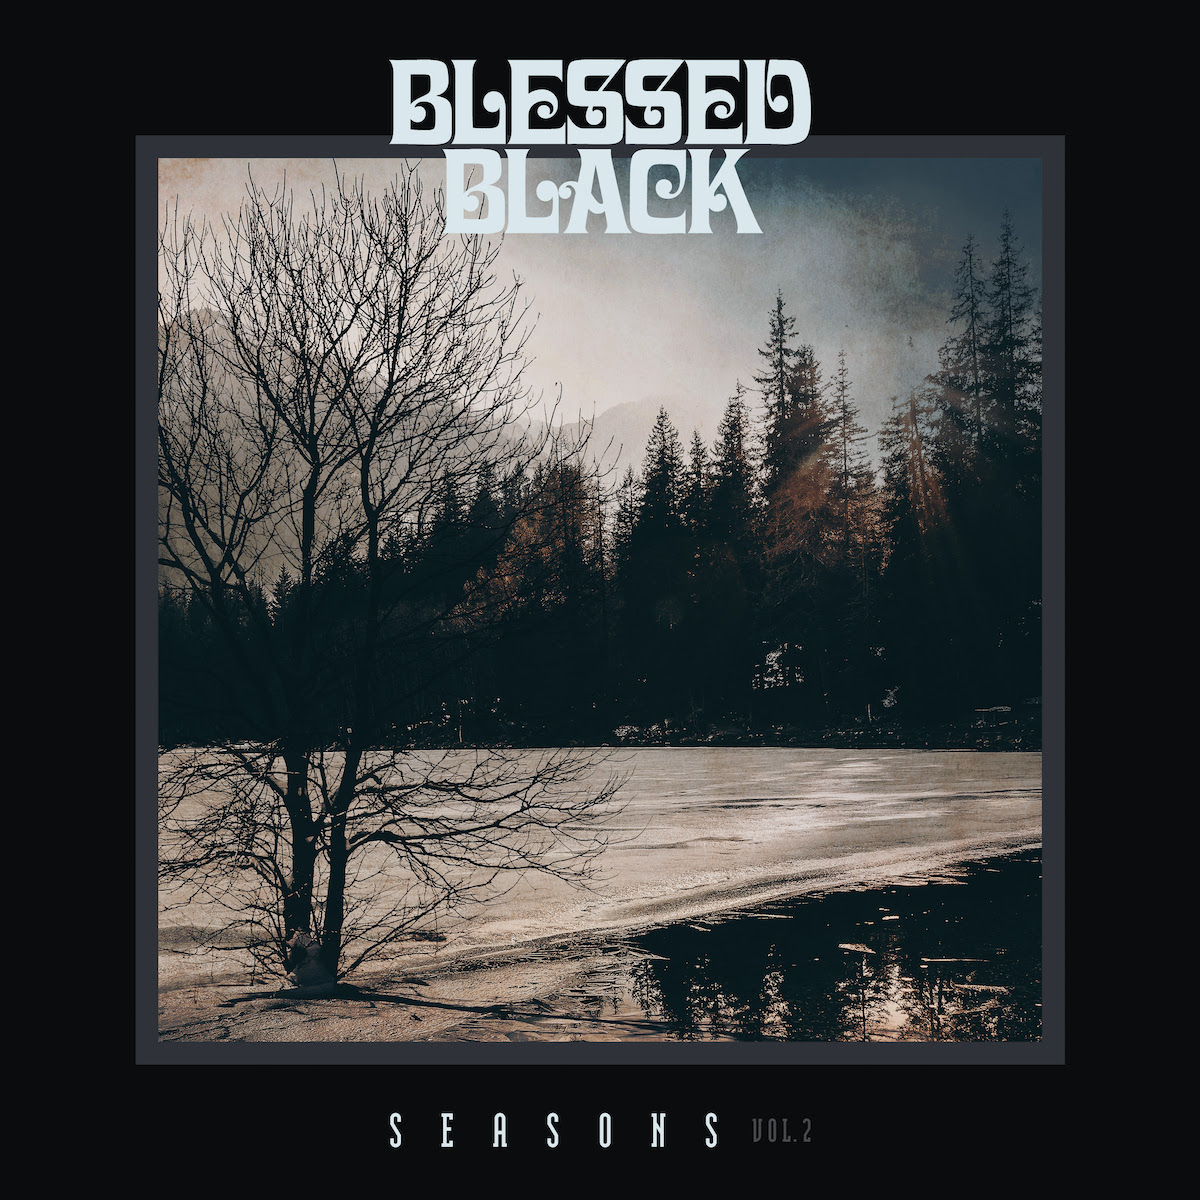 REVIEW: Seasons Vol. 2 by Blessed Black